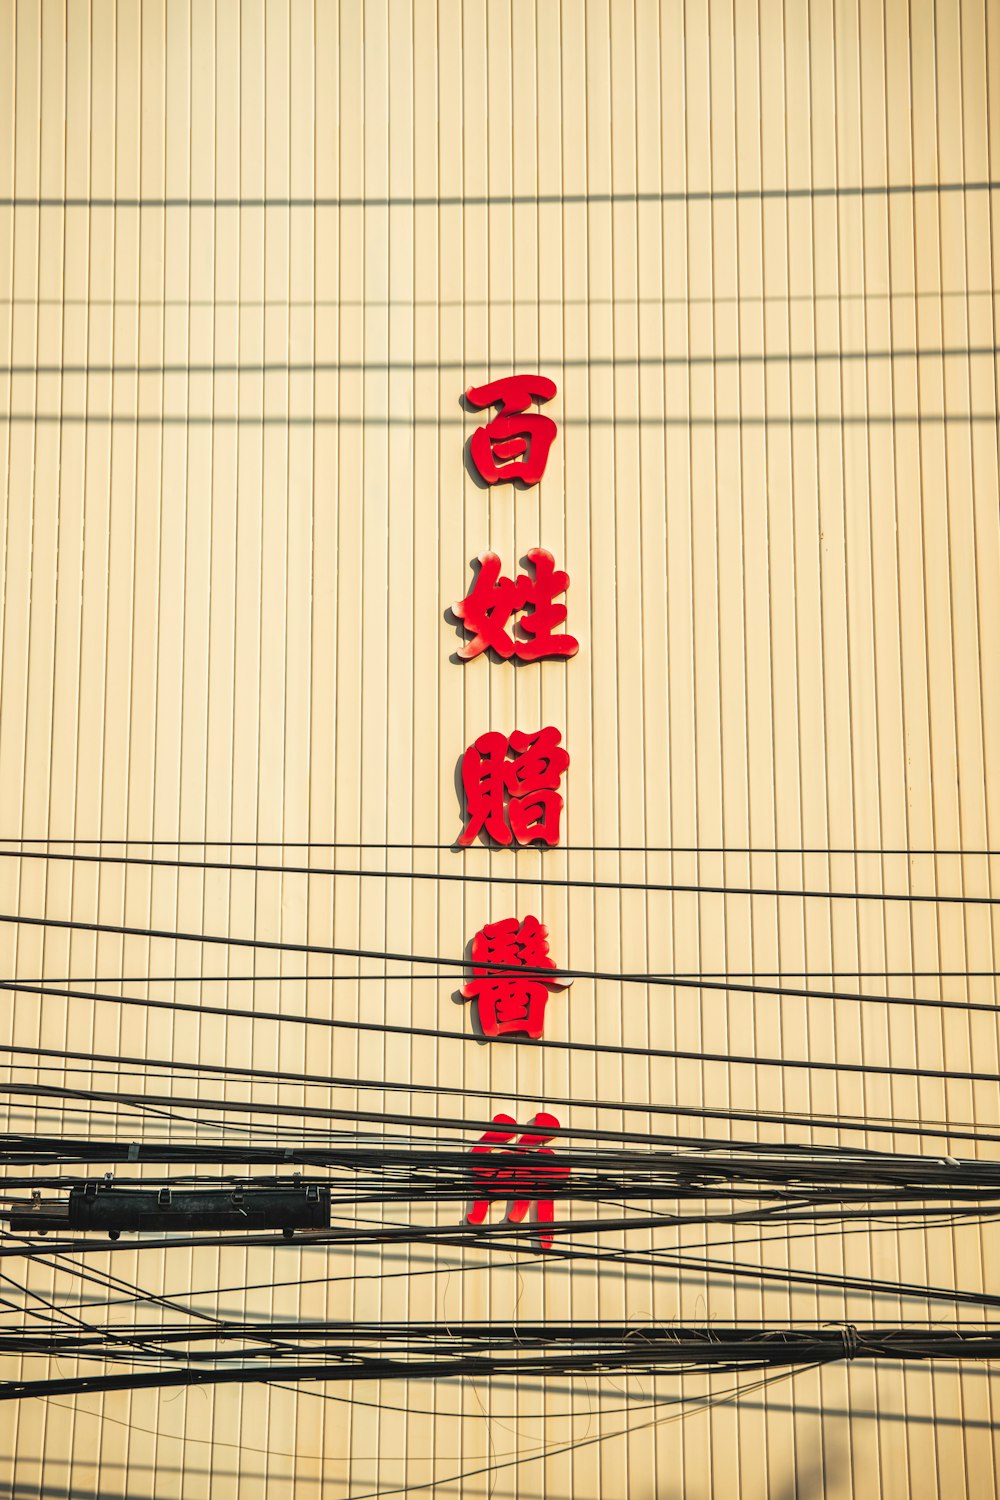 a number of red letters on a wire fence